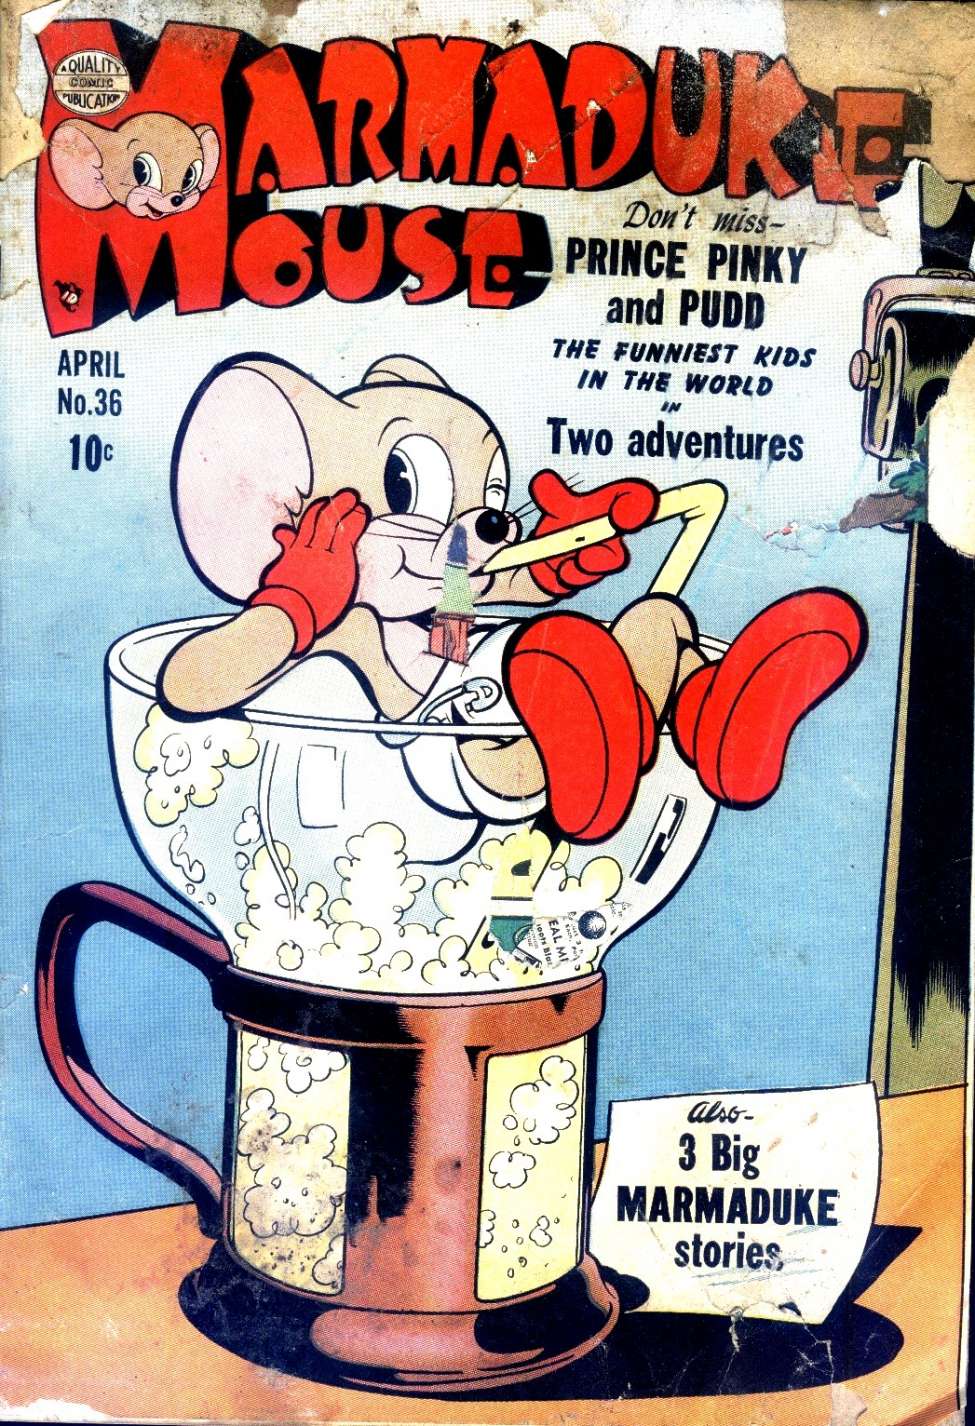 Book Cover For Marmaduke Mouse 36 - Version 1